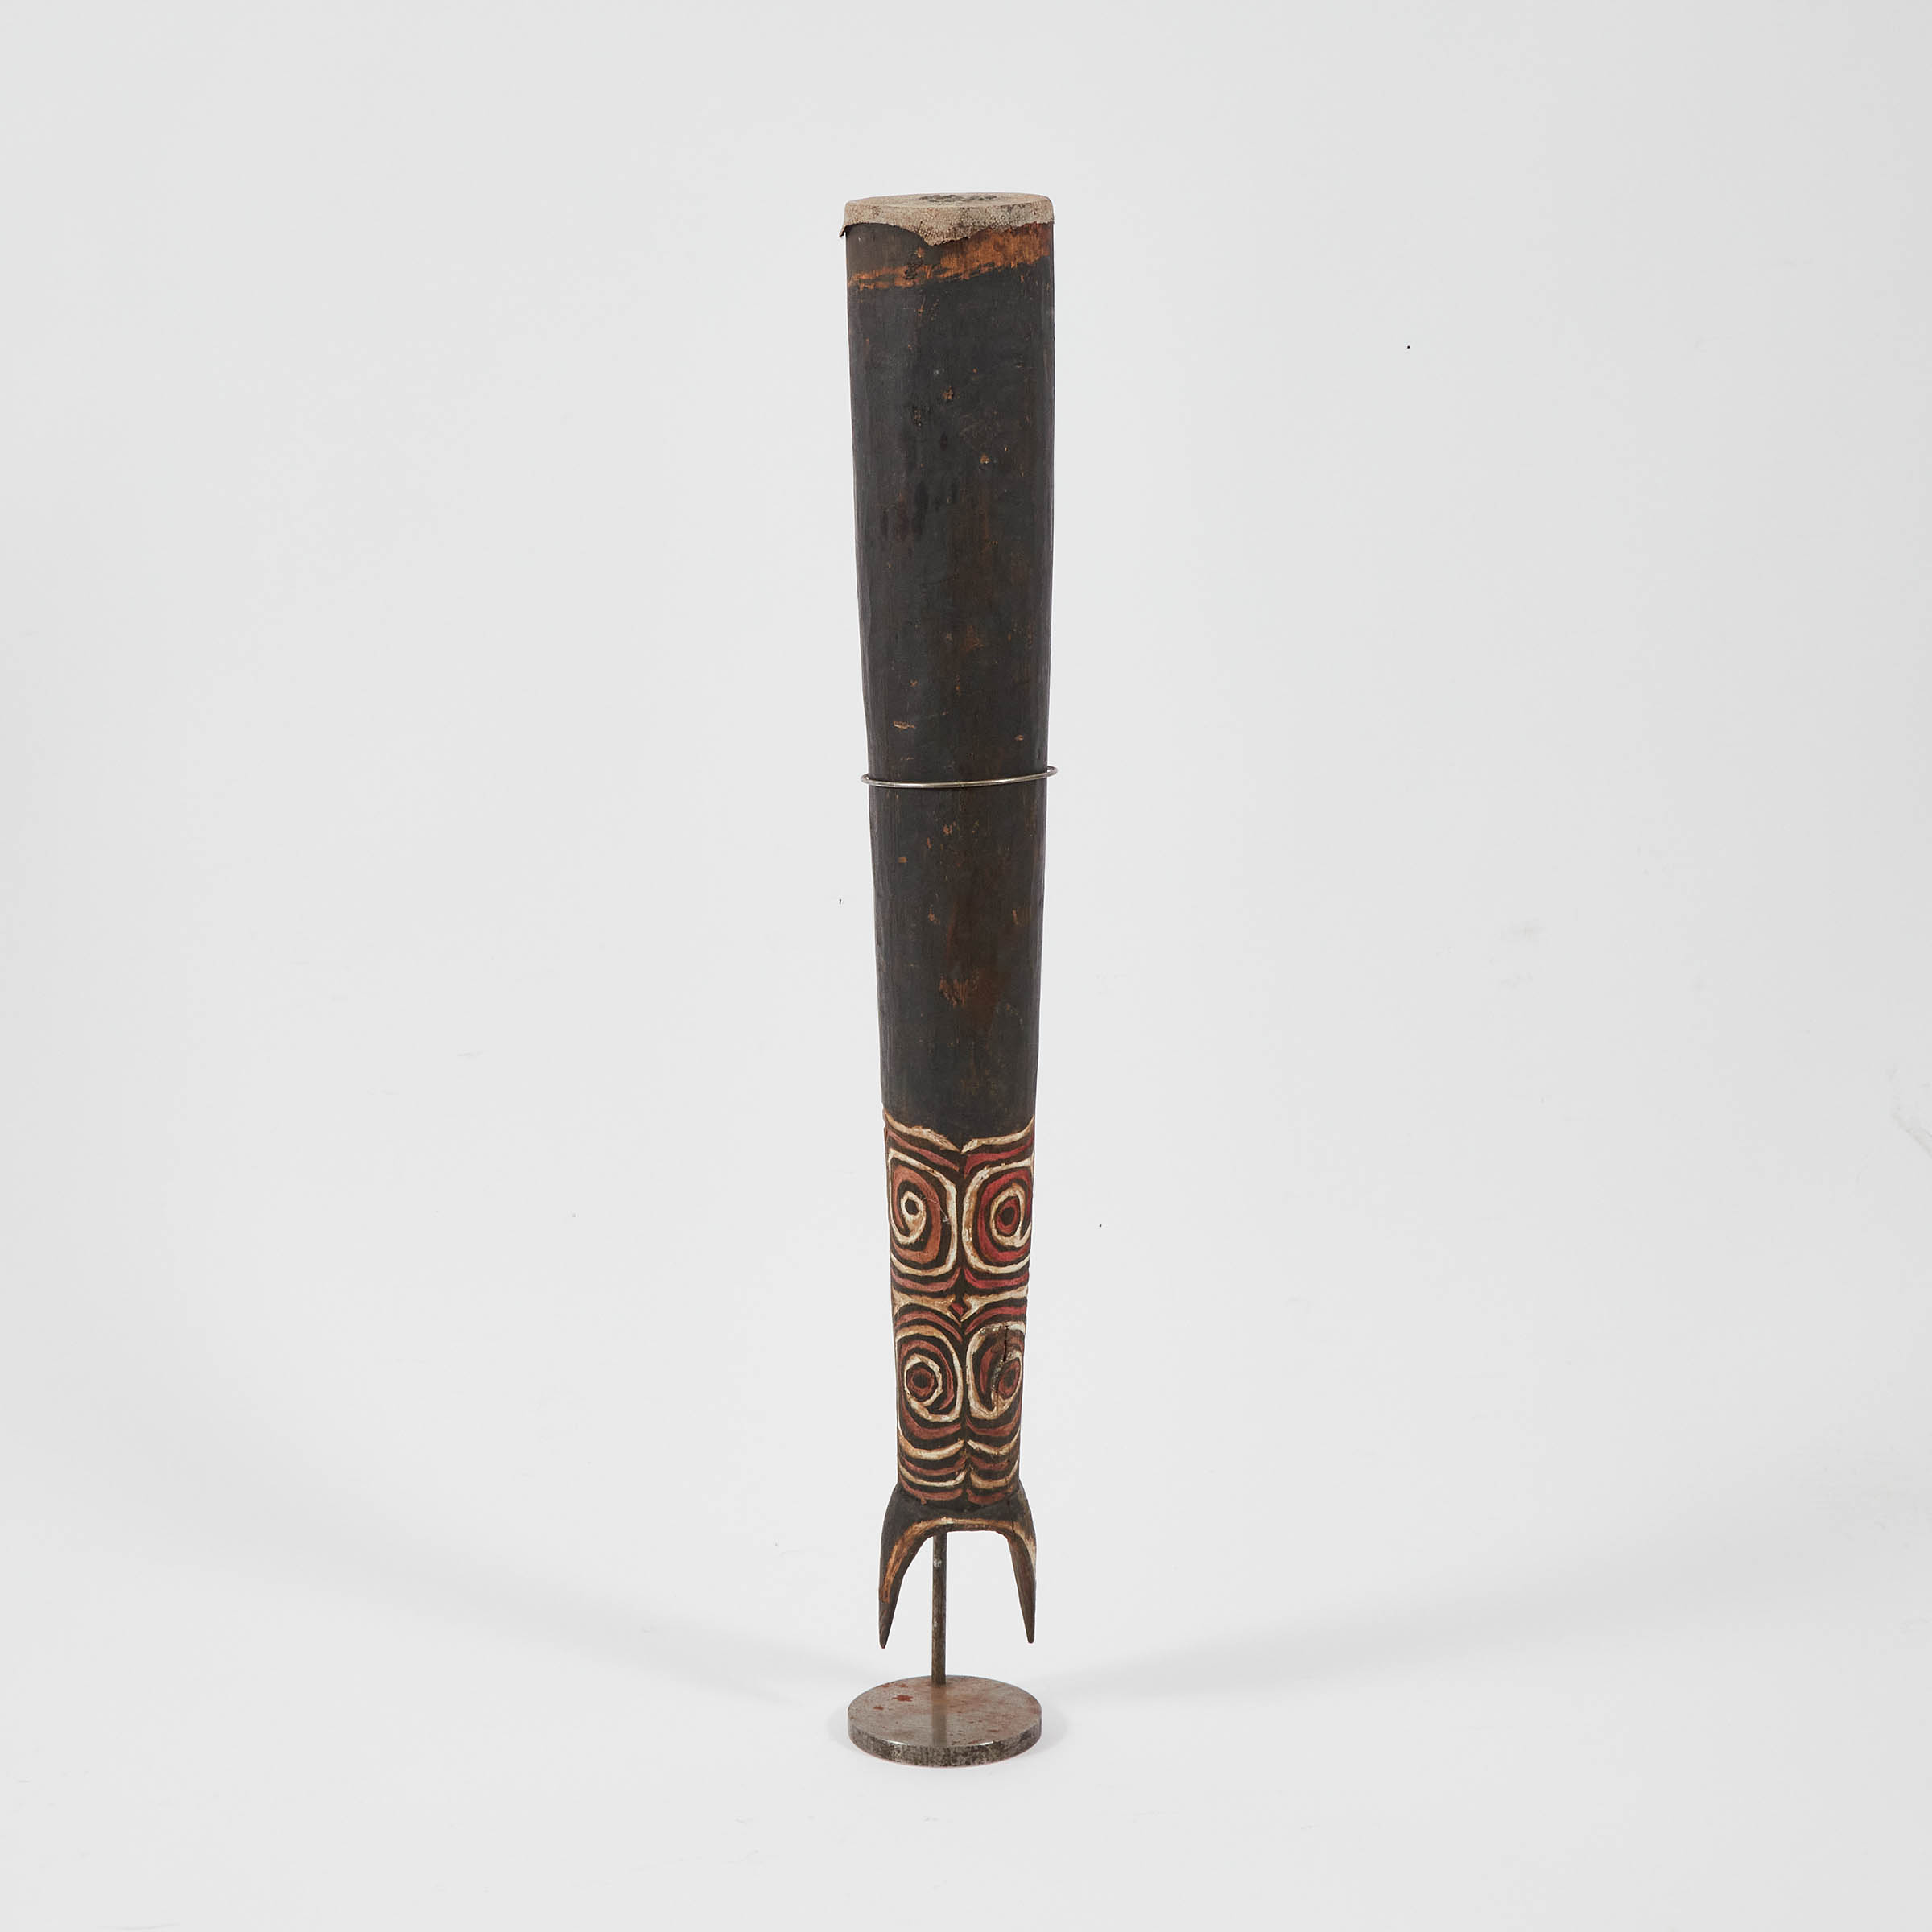 Papua New Guinea Drum possibly 2fb0a68